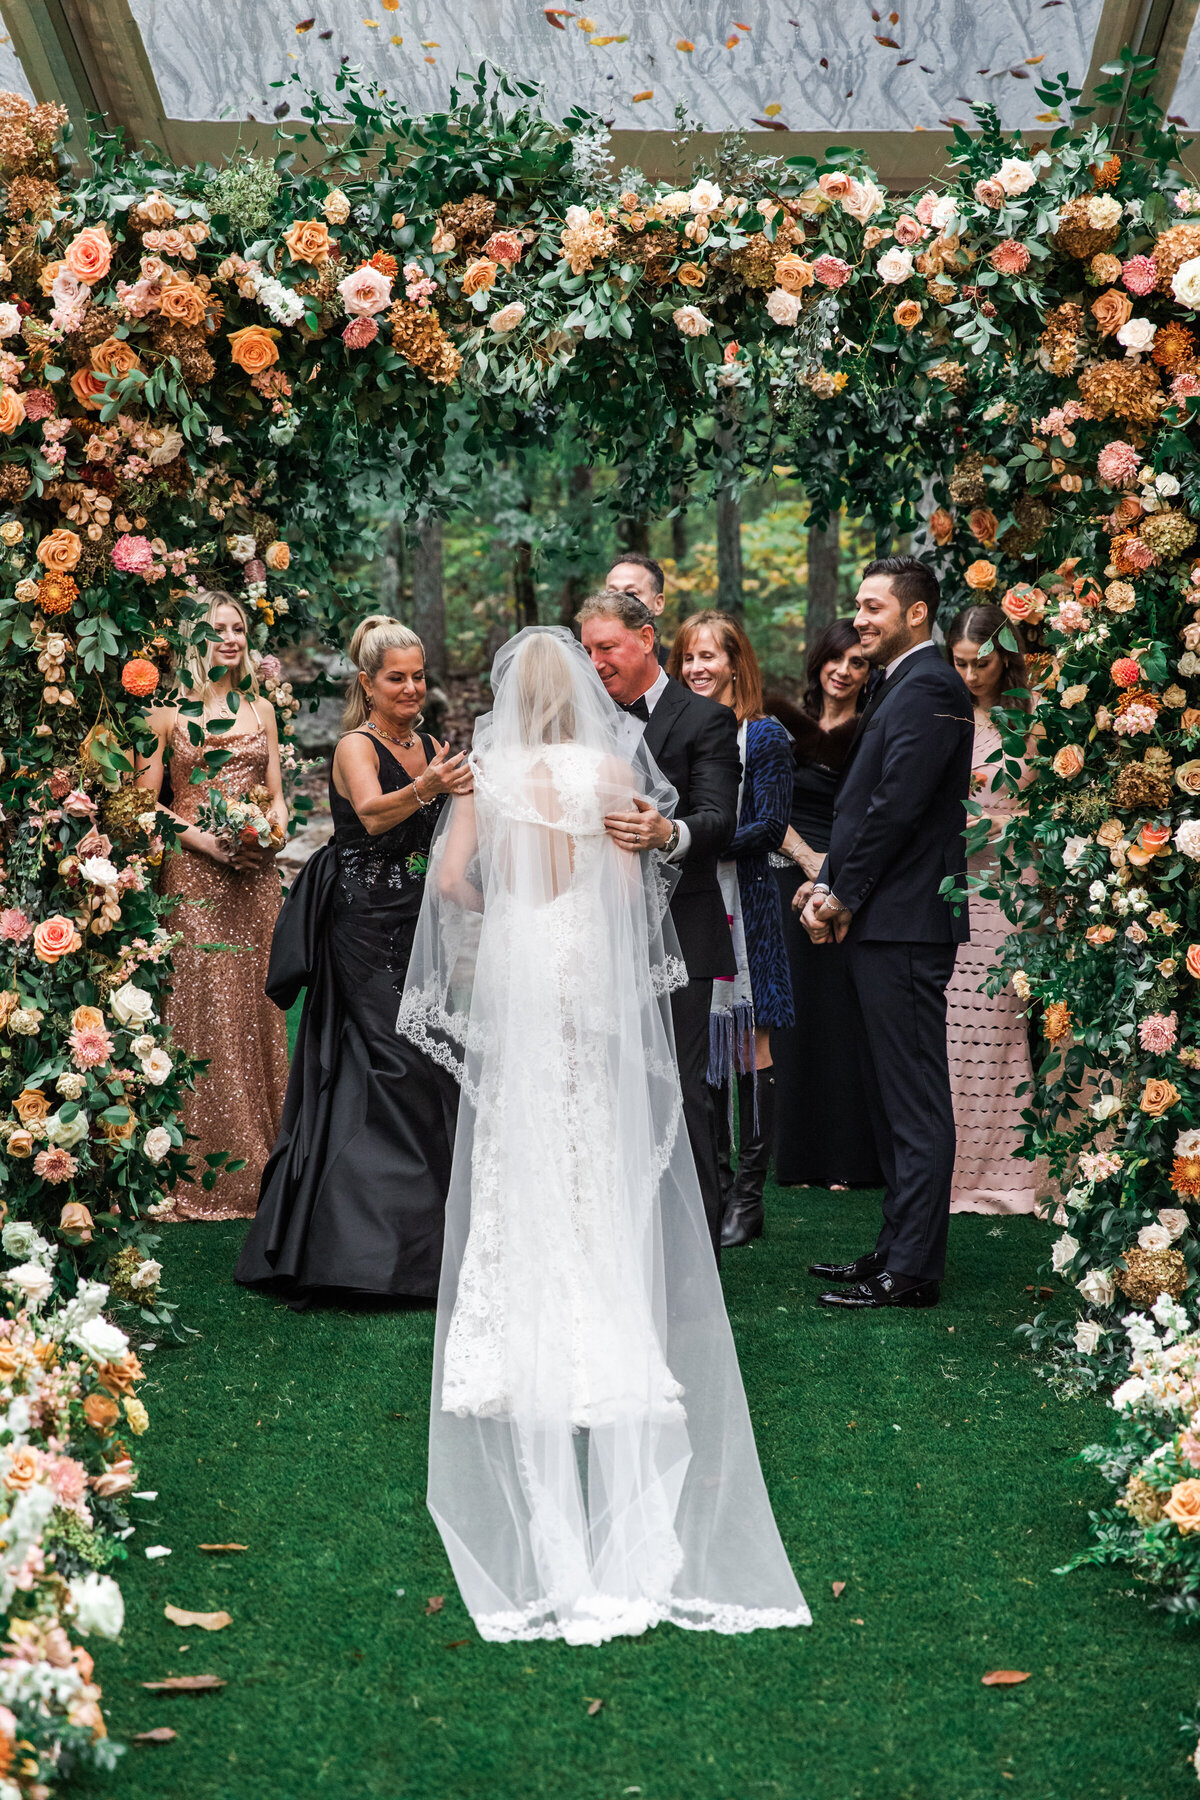 Eye-catching oversized chuppah overflowing with fall florals featuring dahlias, garden roses, rain tree pods, and fall greenery. Autumnal hues of terra cotta, dusty pink, copper, and yellow create this statement wedding piece. Designed by Rosemary and Finch in Nashville, TN.